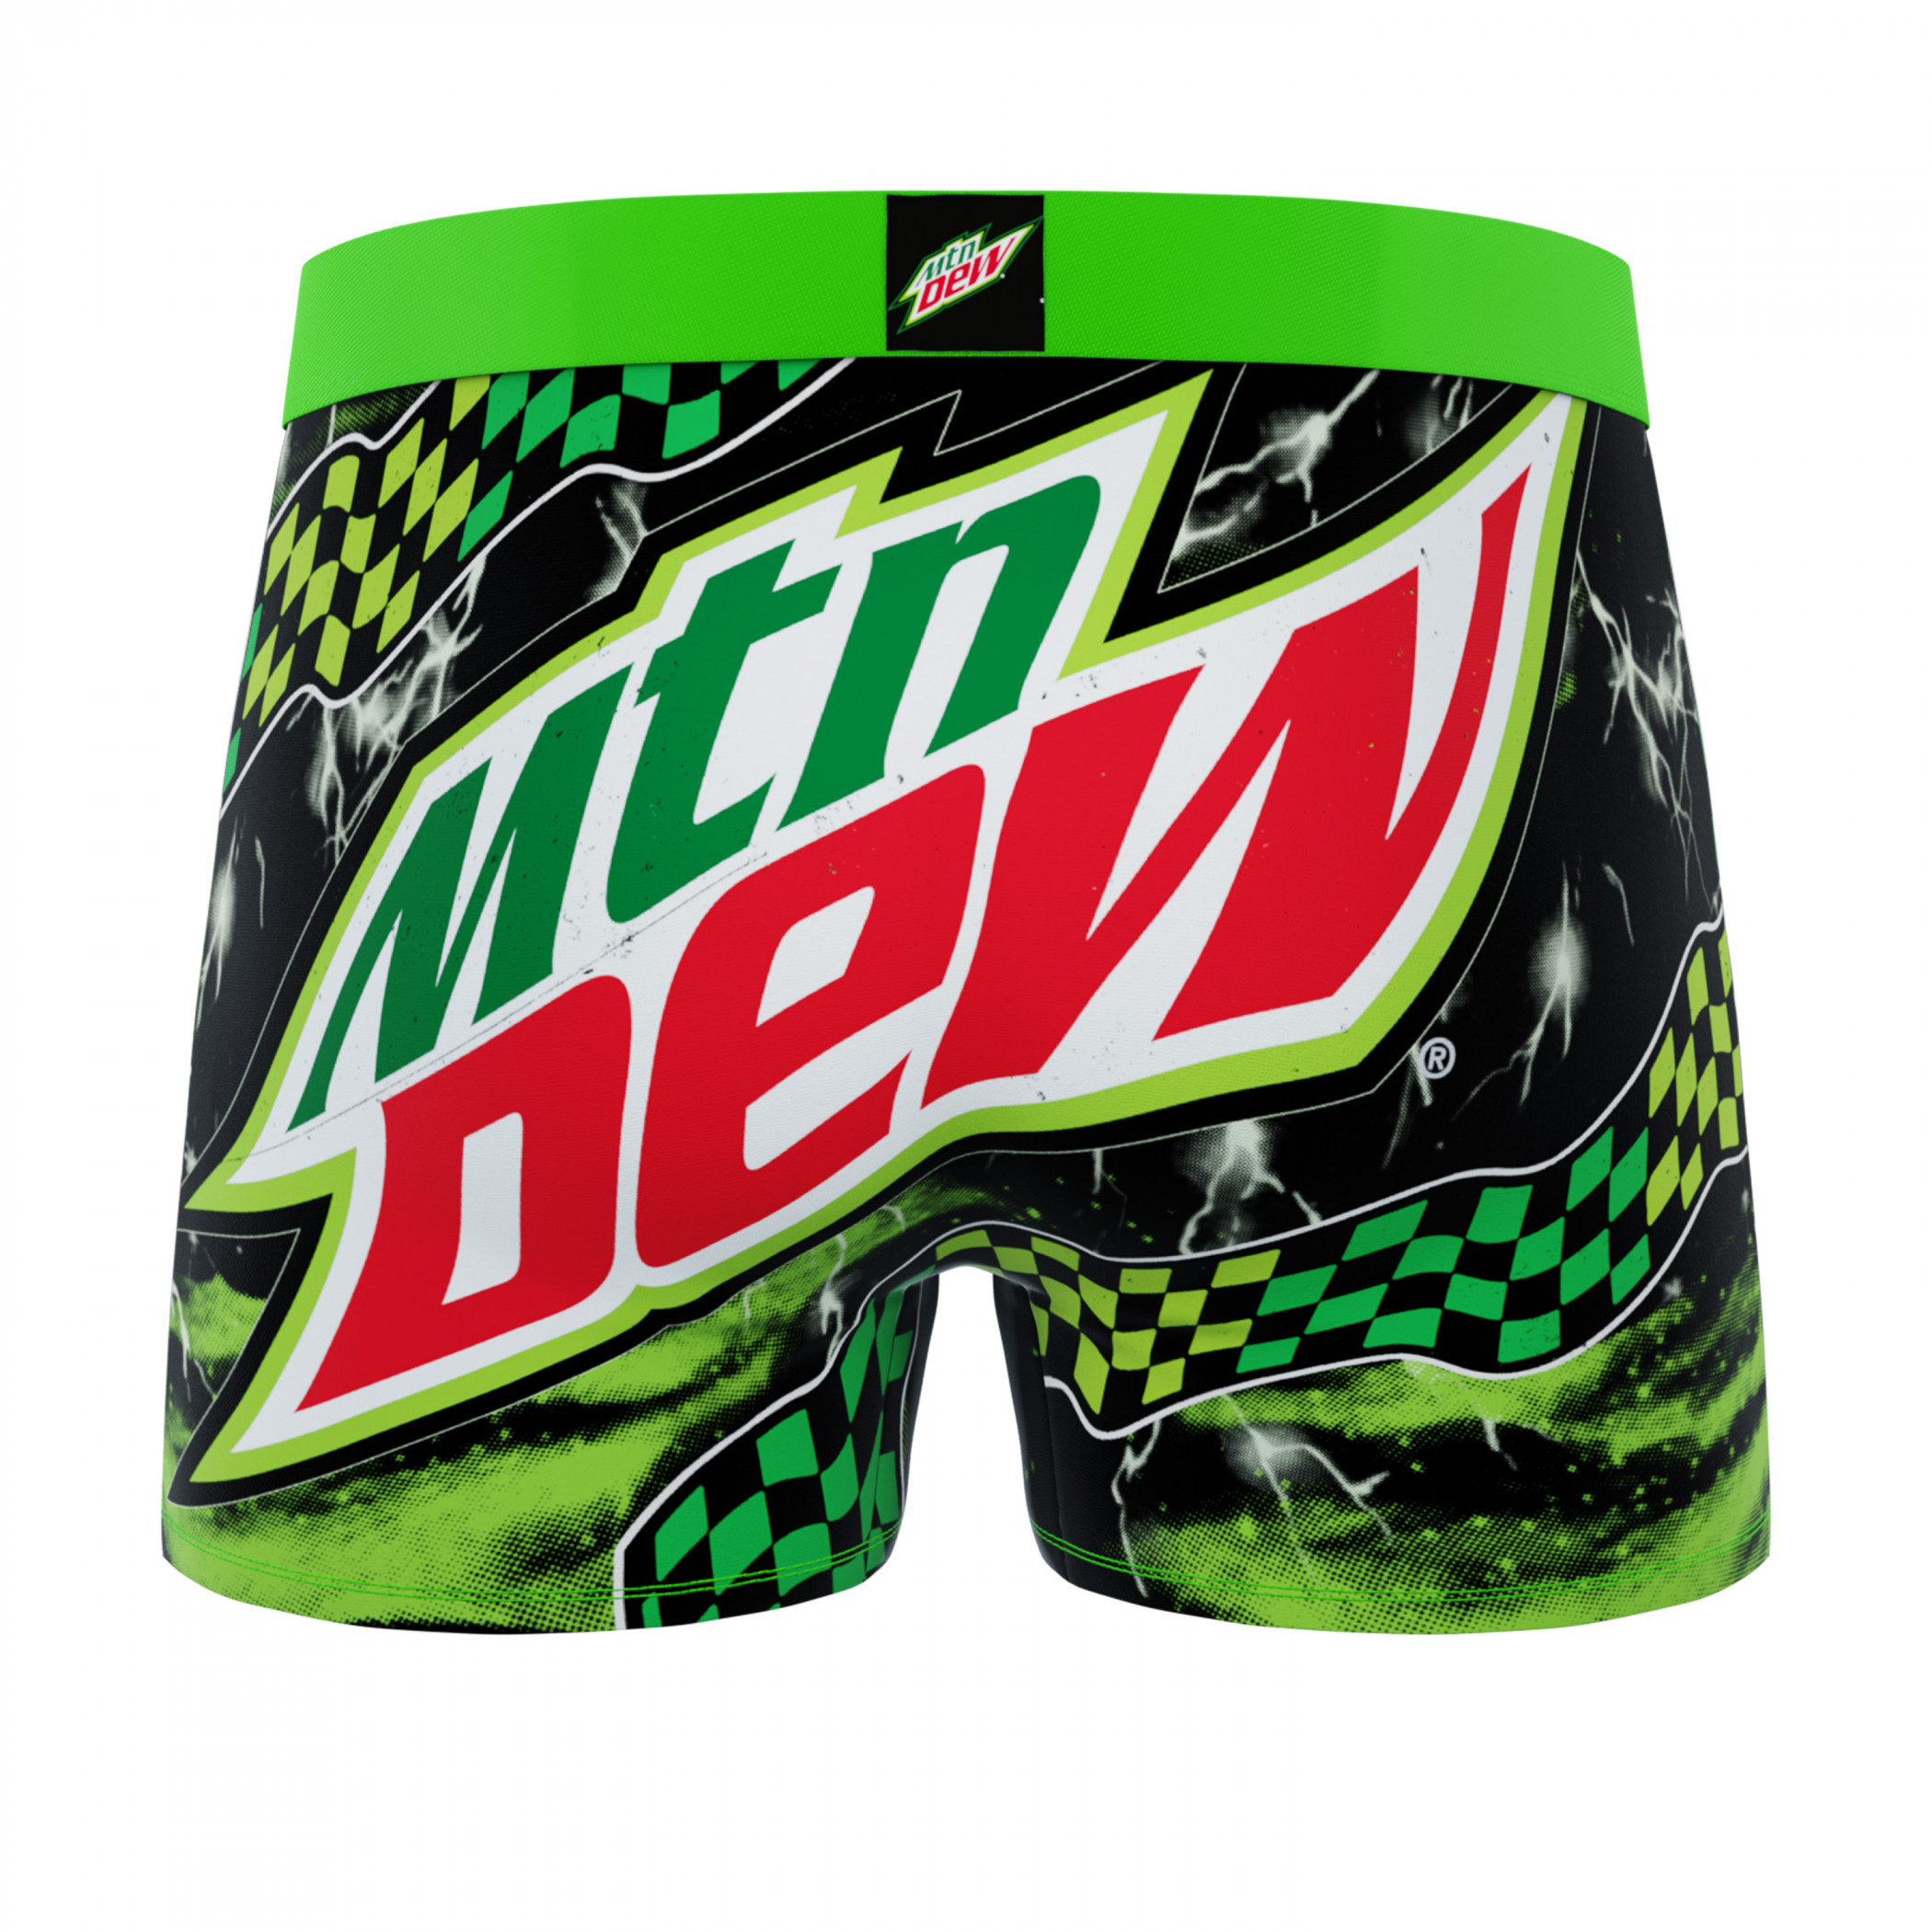 Crazy Boxers Mountain Dew Logo Boxer Briefs and Socks in Soda Can